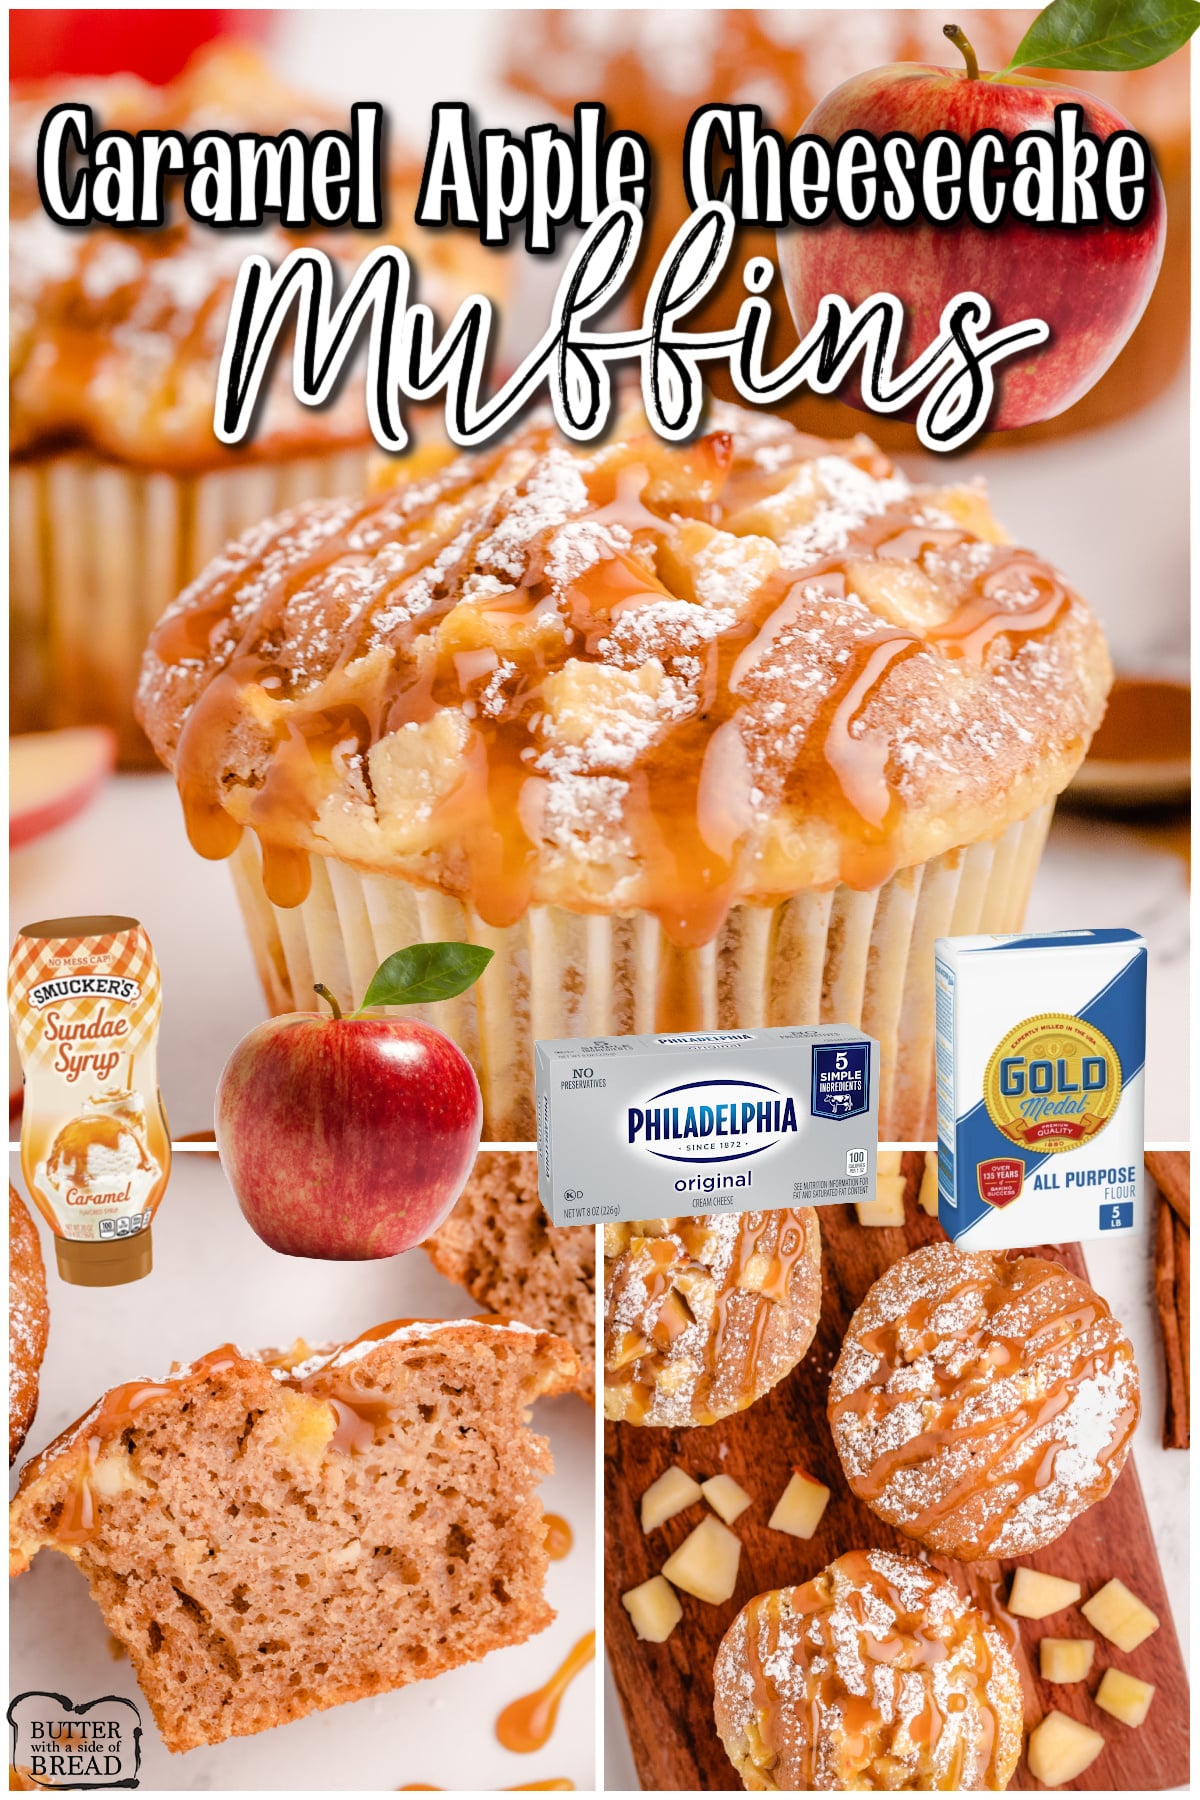 Caramel Apple Cheesecake Muffins made with spiced cake mix, filled with apples & cream cheese then topped with caramel! Decadent, bakery-style muffins made easy!